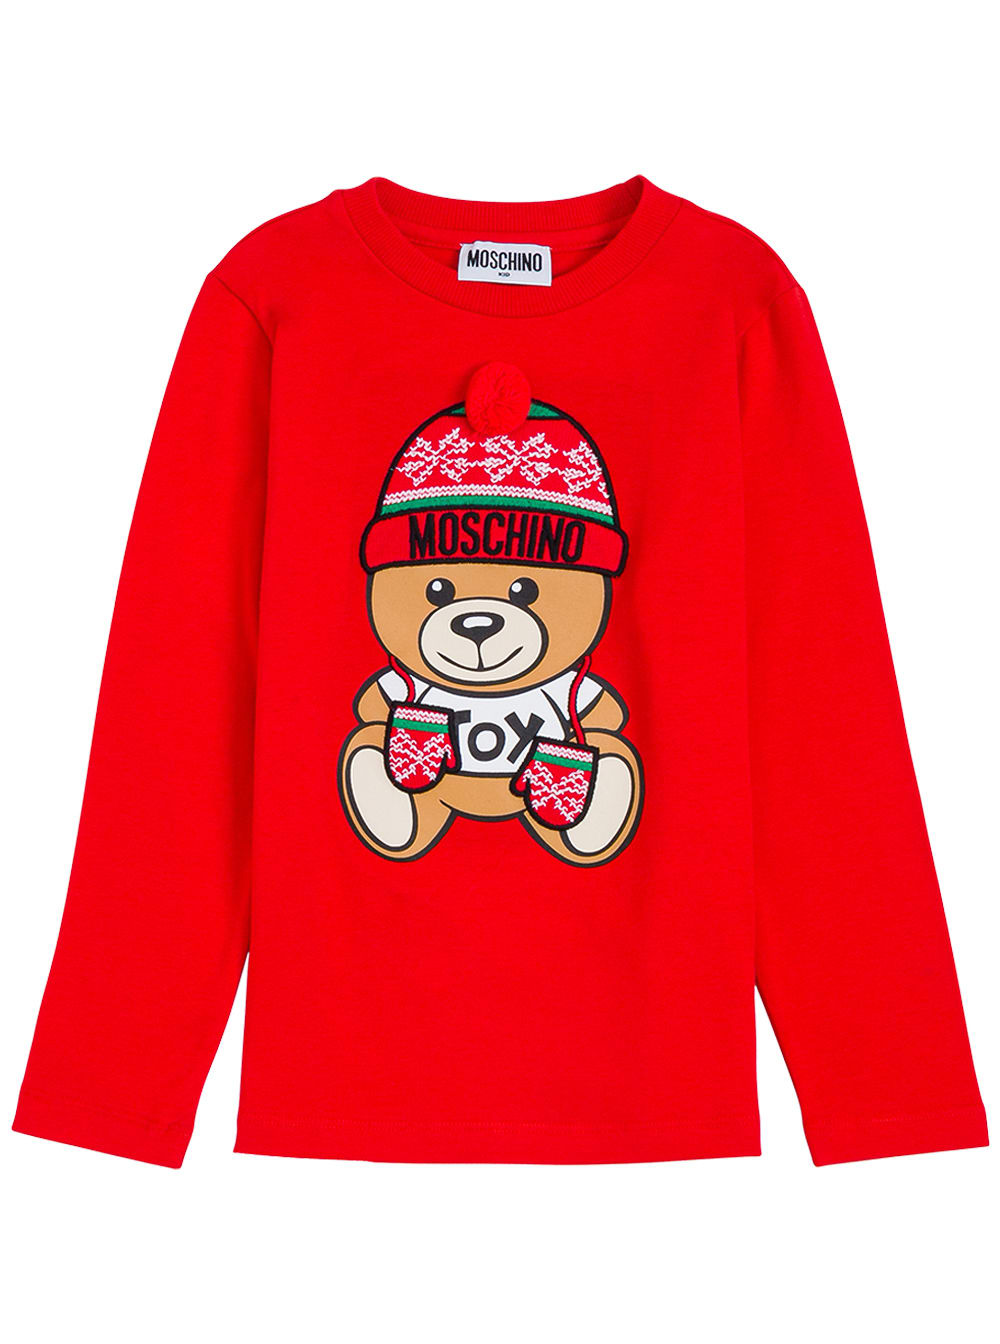 Moschino Long-sleeved Red Cotton T-shirt With Teddy Print